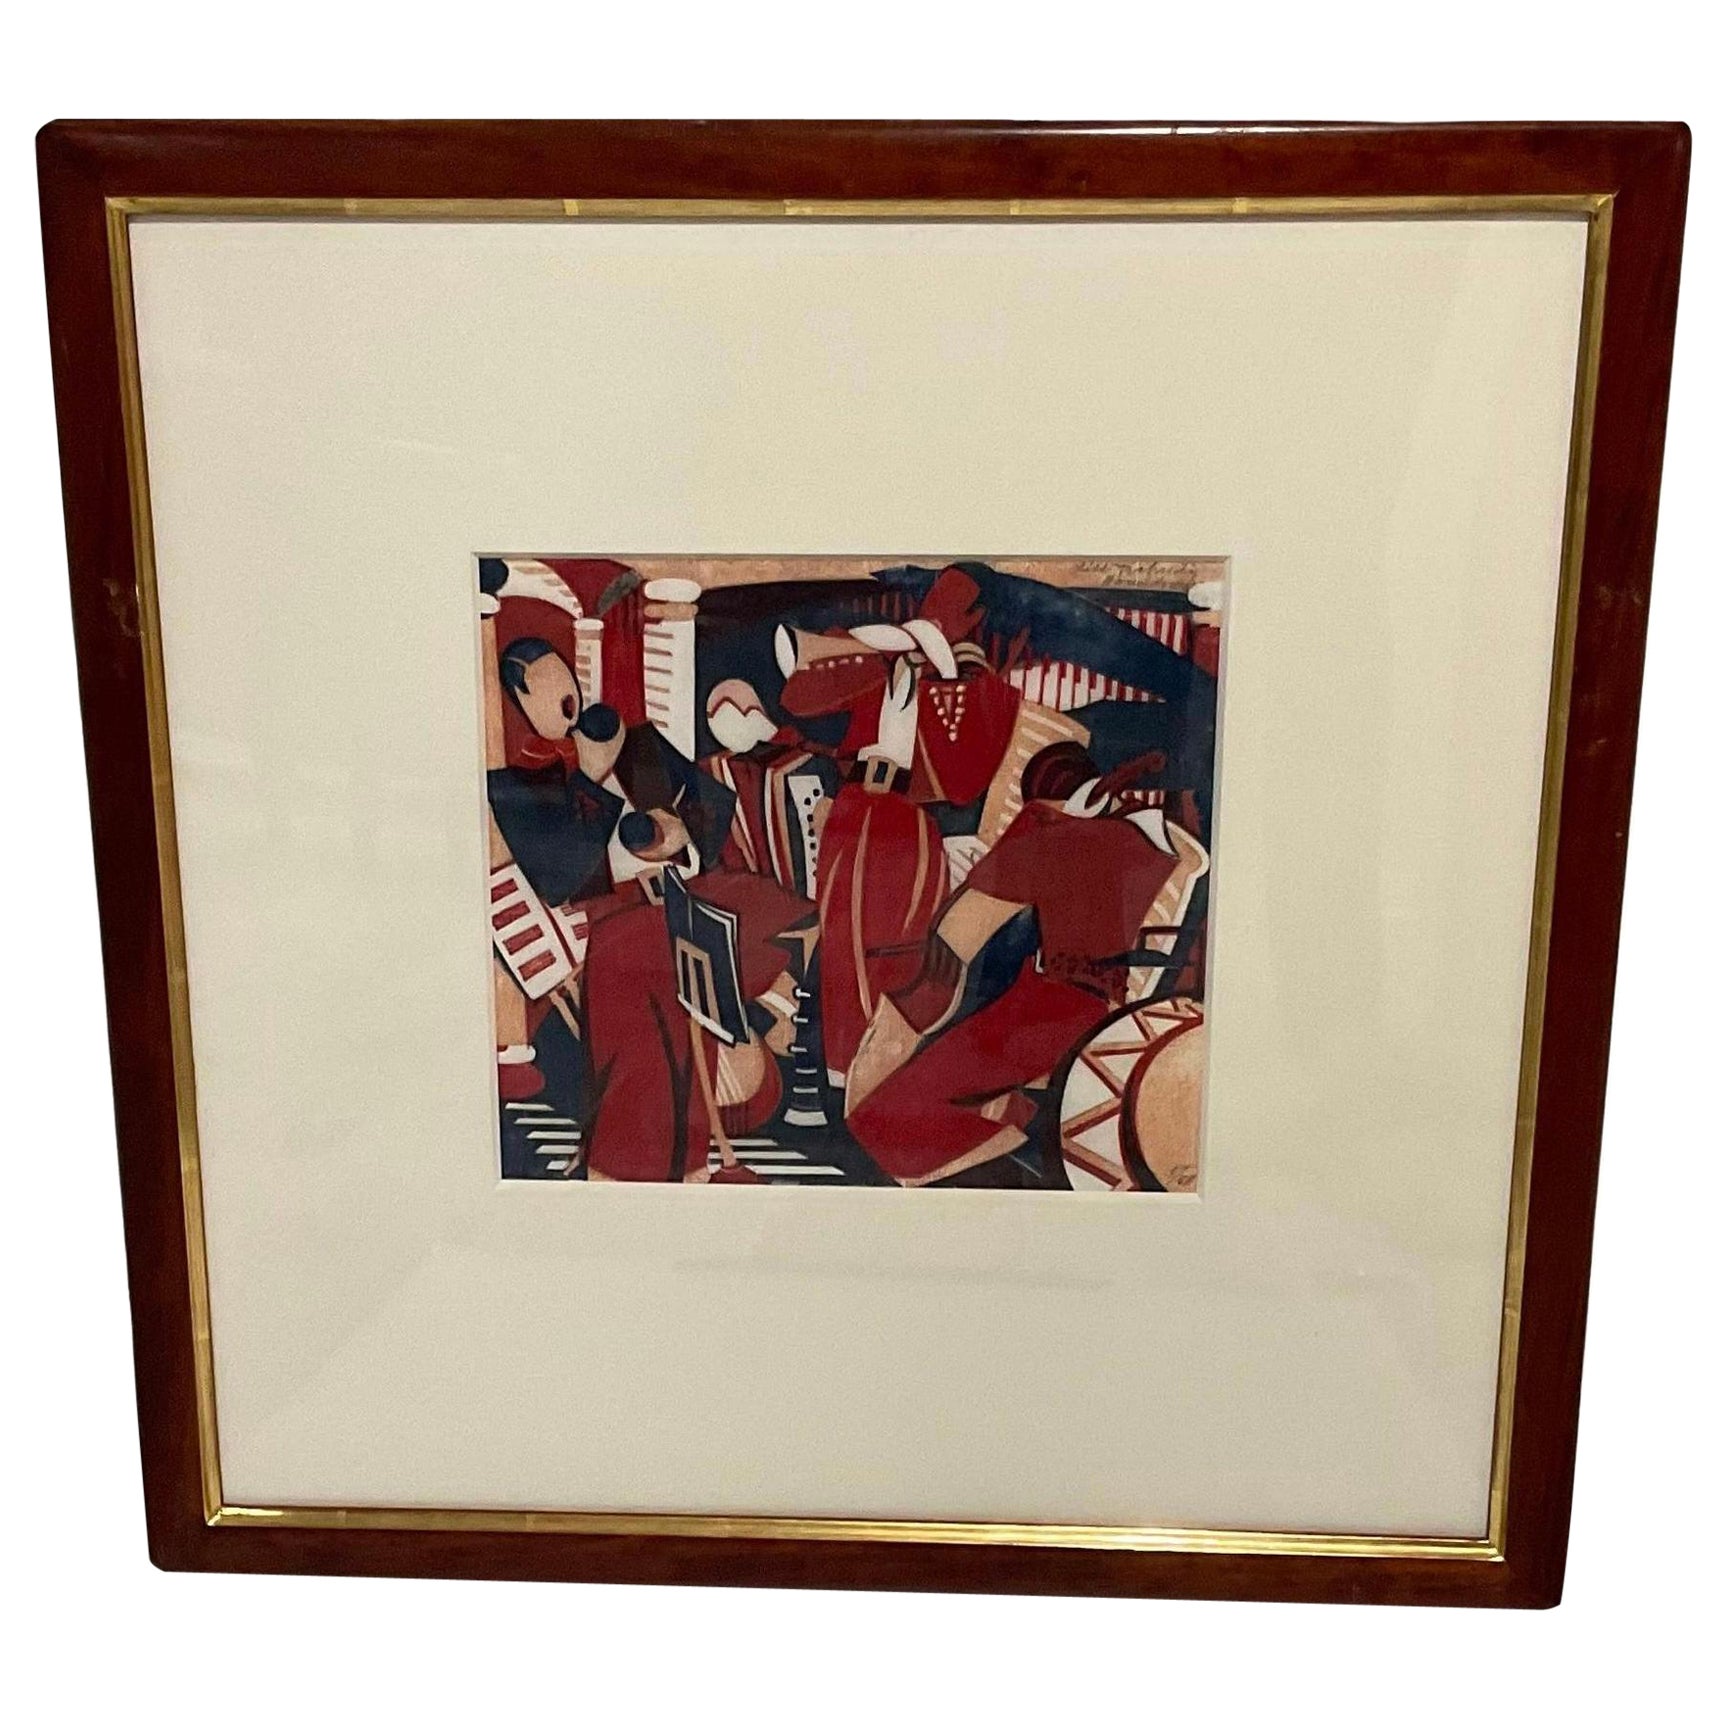 Lill Tschudi (1911-2004) Rhumba Band II Lino Cut Signed and Numbered 5 of 50 For Sale